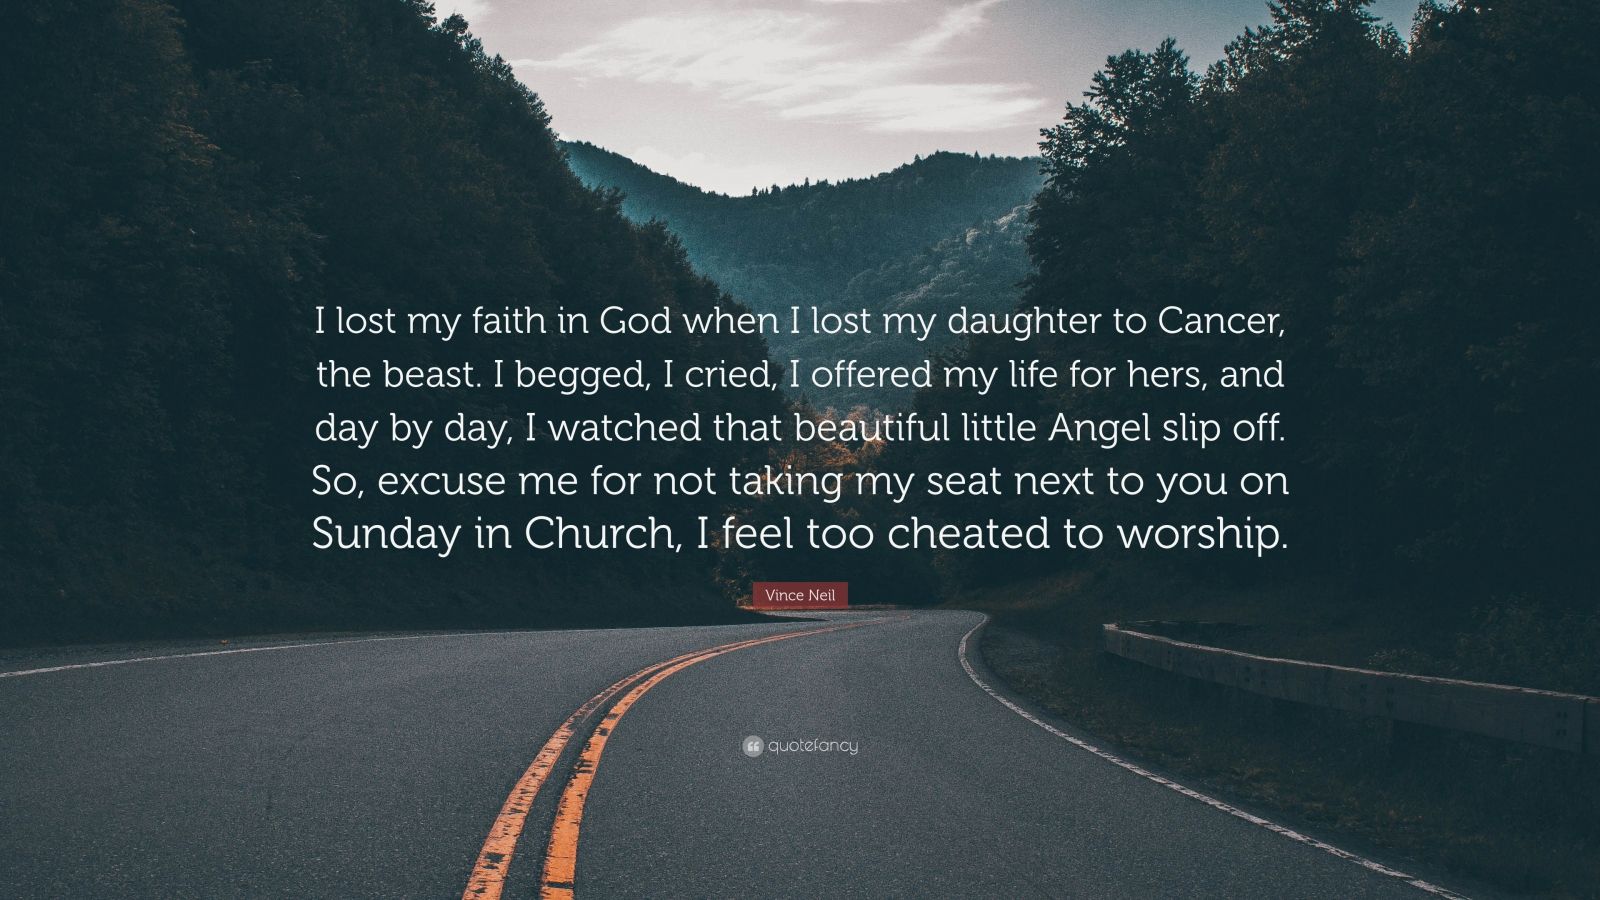 Vince Neil Quote: "I lost my faith in God when I lost my ...